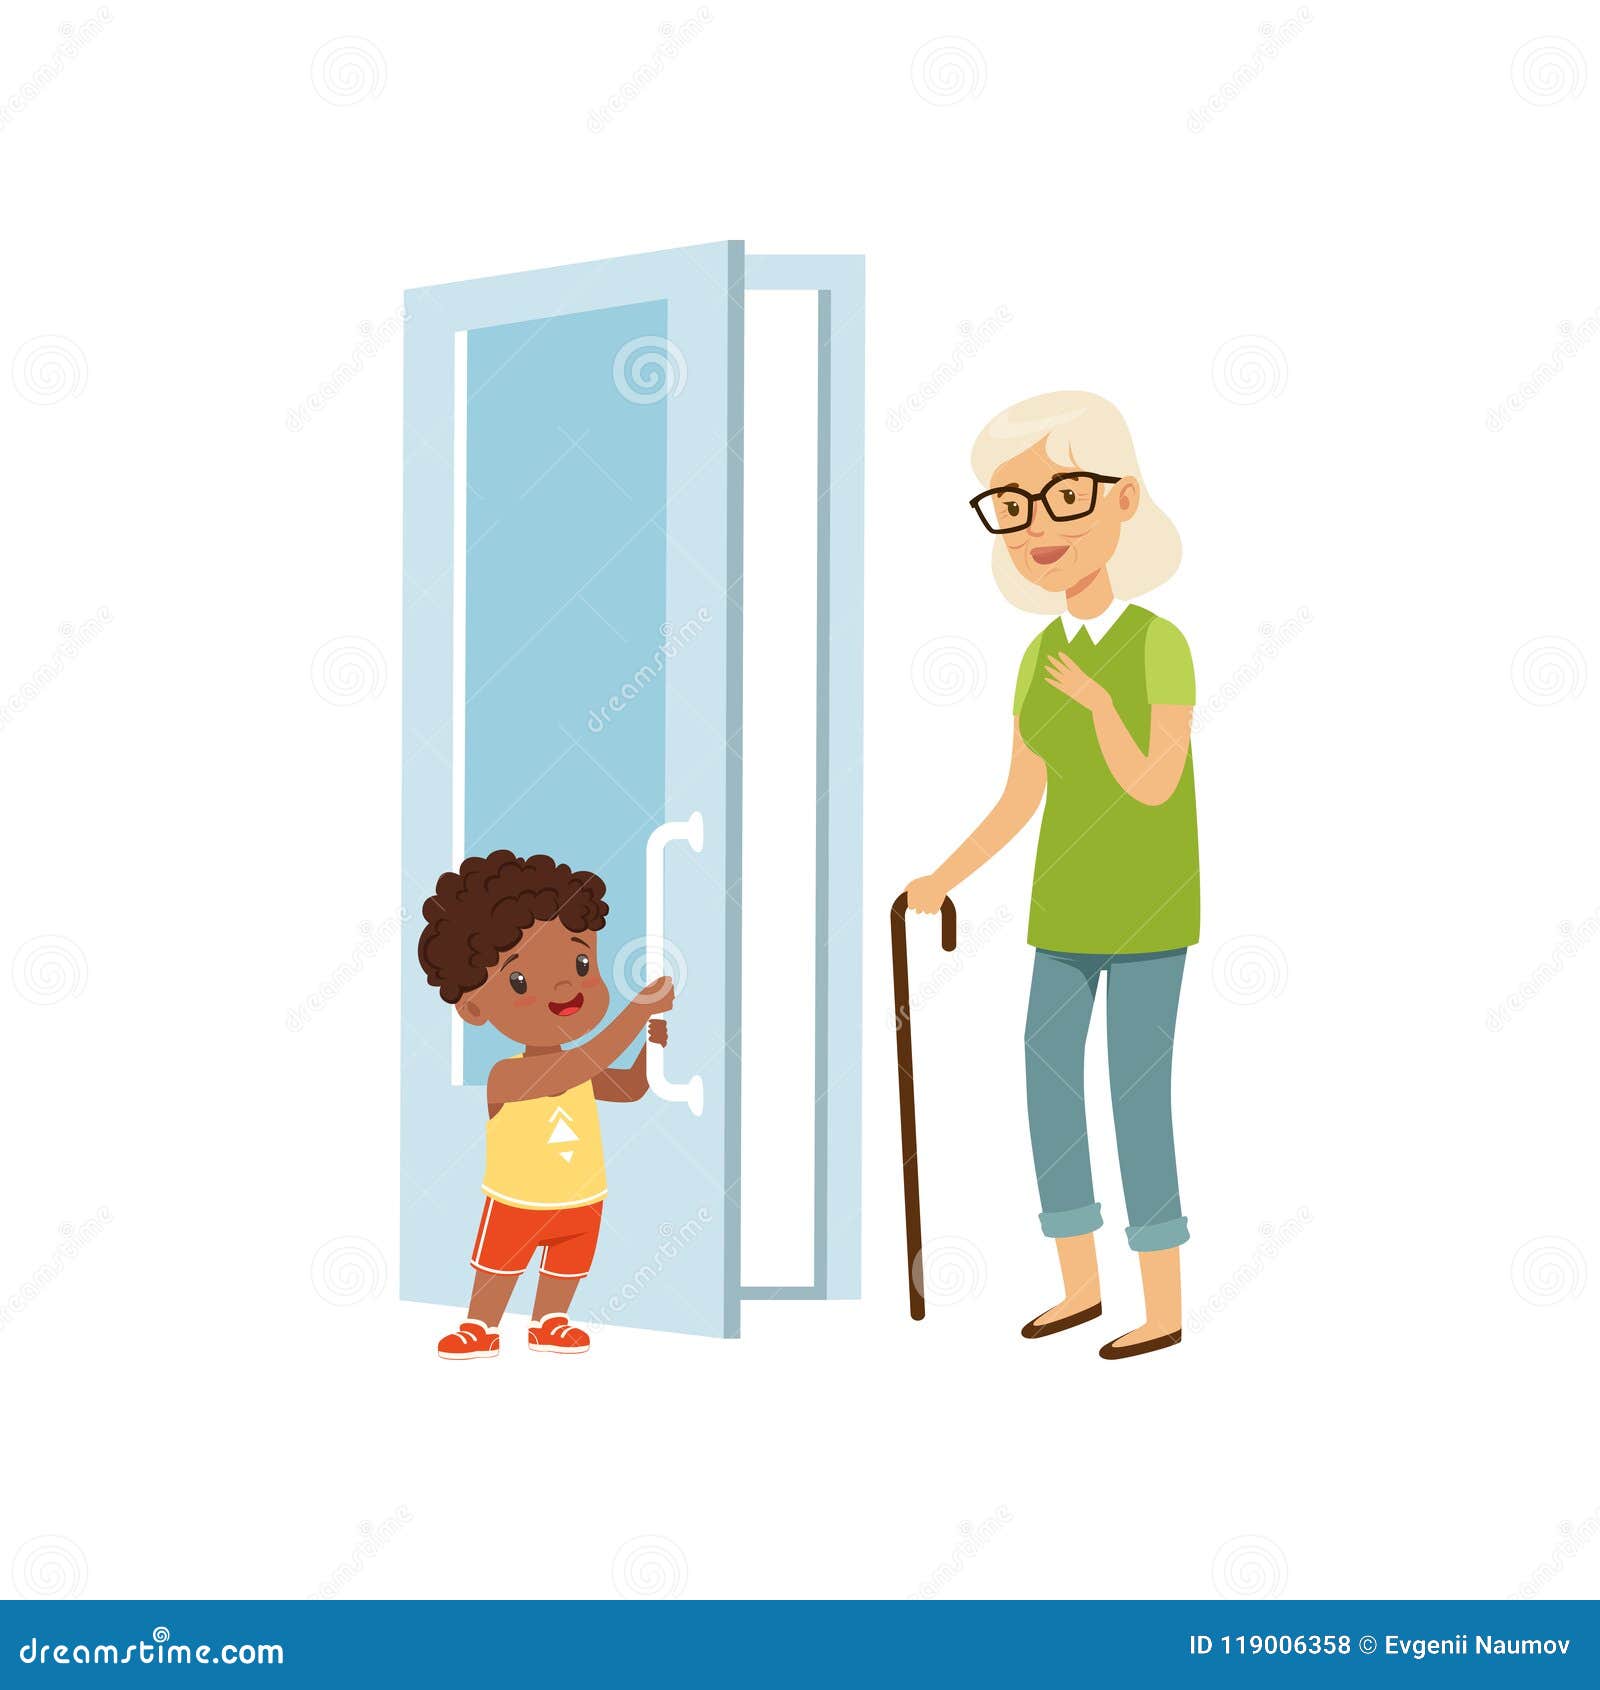 boy opening the door to an elderly woman, kids good manners concept   on a white background